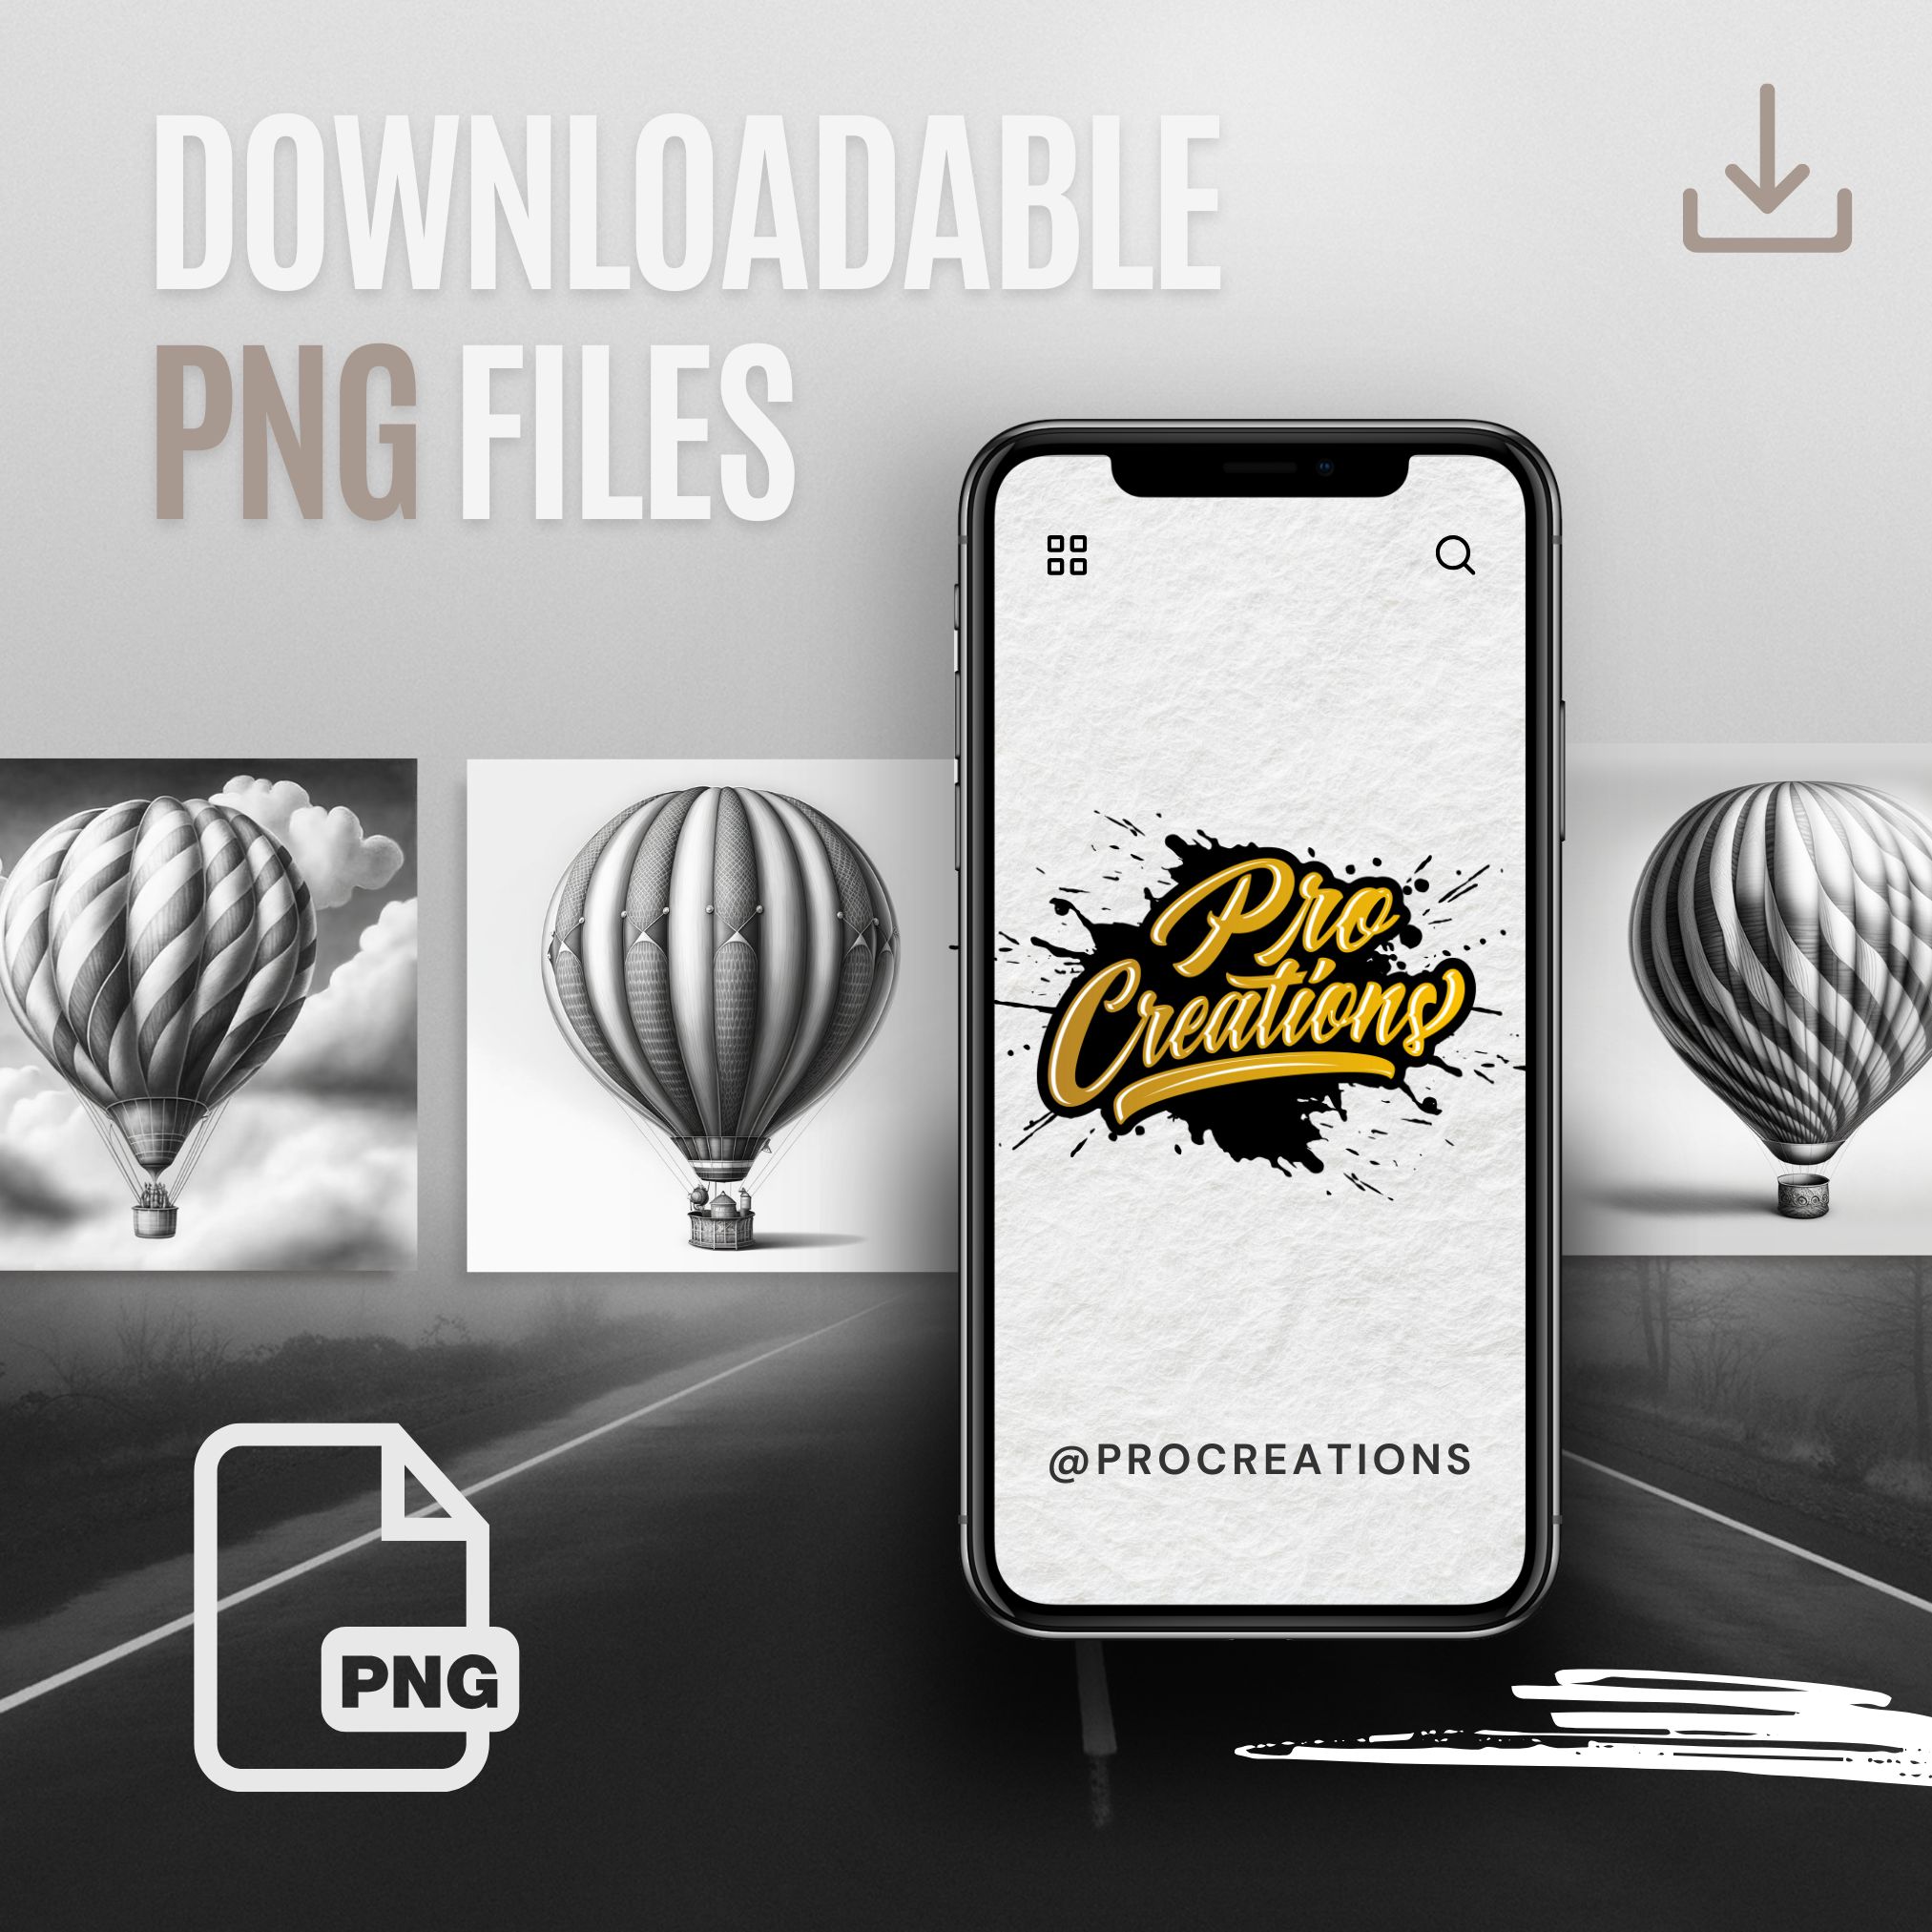 Hot Air Balloons Digital Design Collection: 50 Procreate & Sketchbook Images